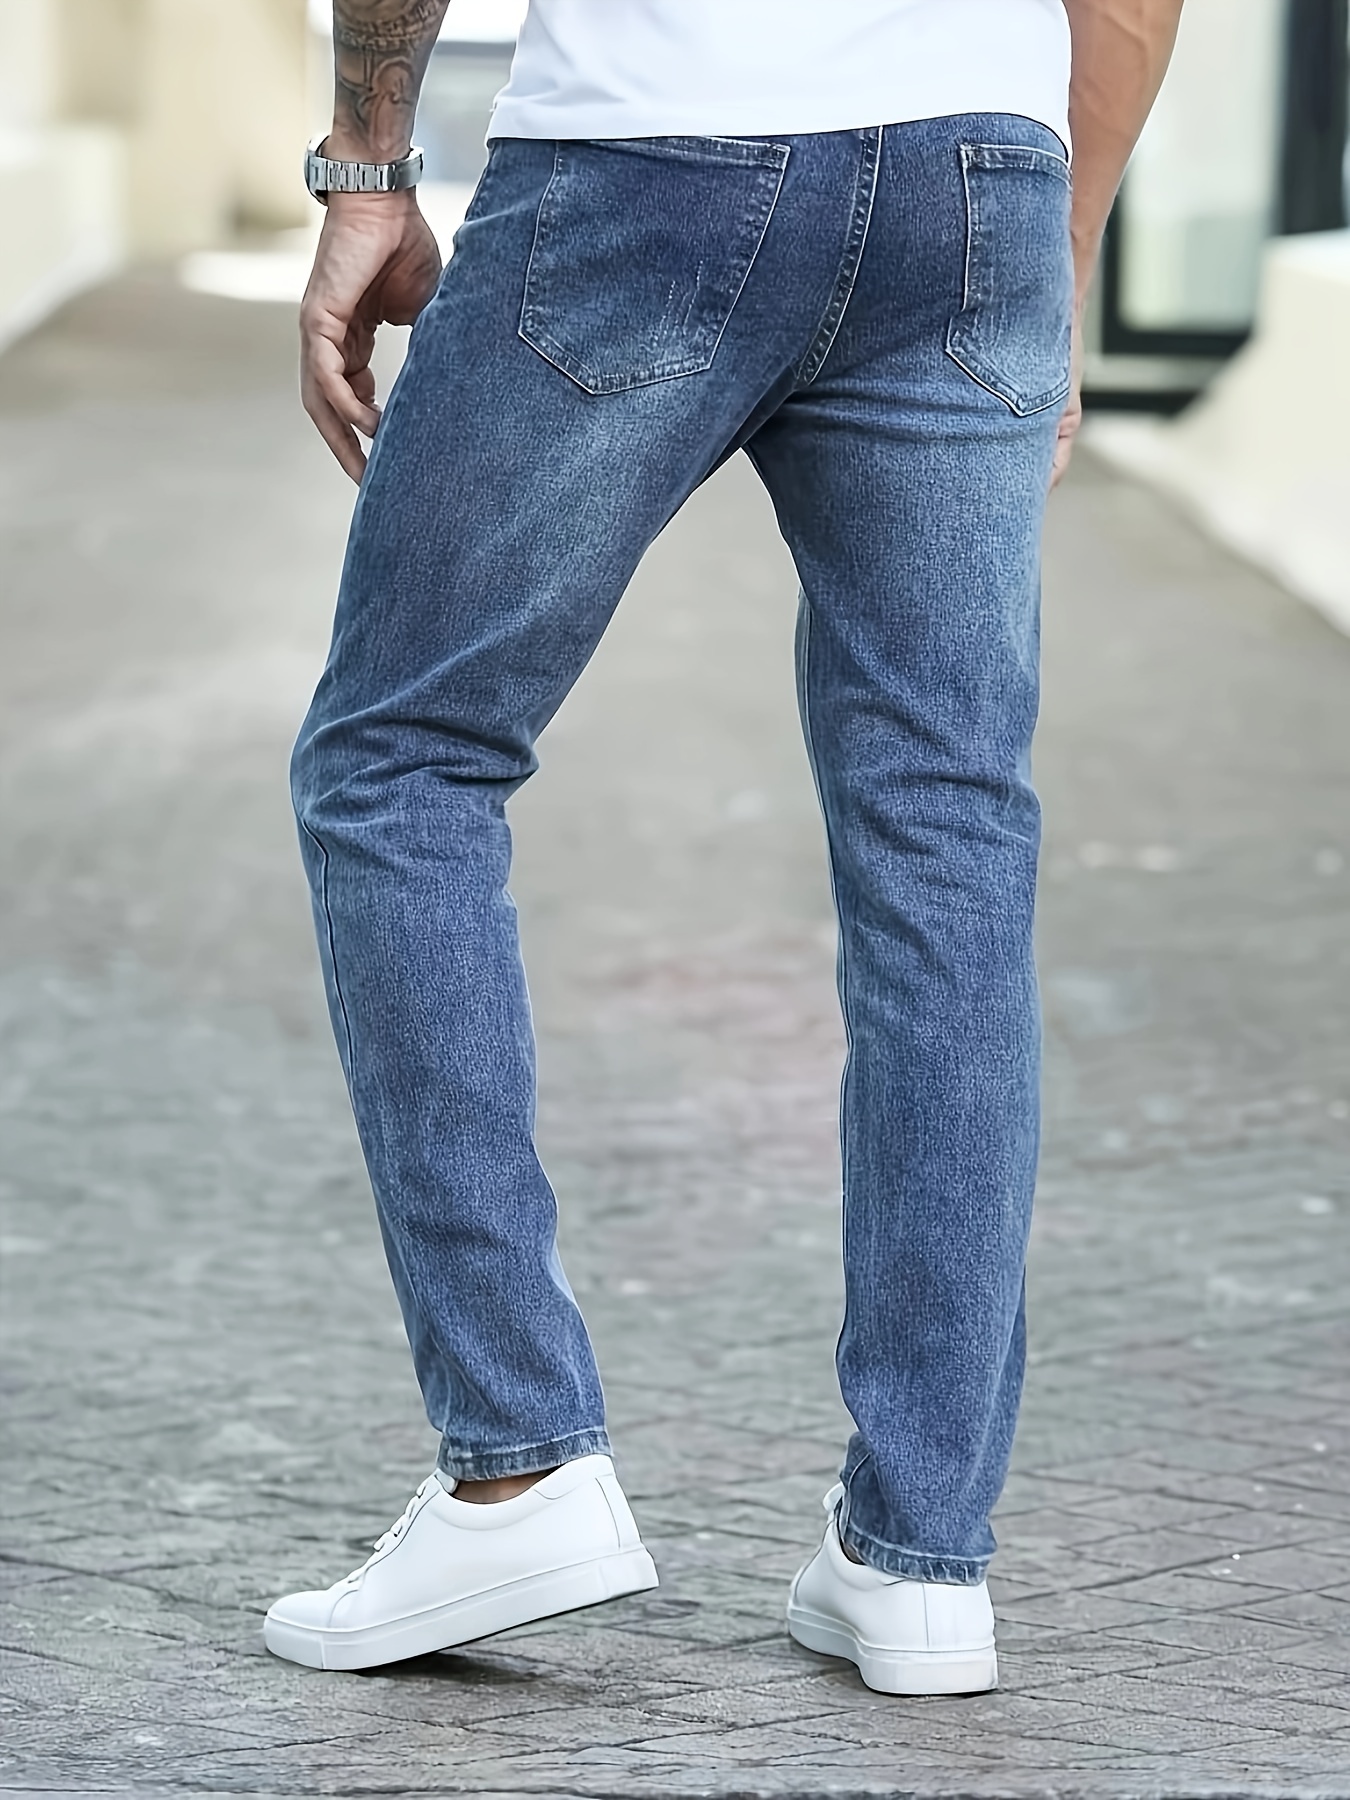 Slim Fit Washed Jeans, Men's Casual Street Style Medium Stretch